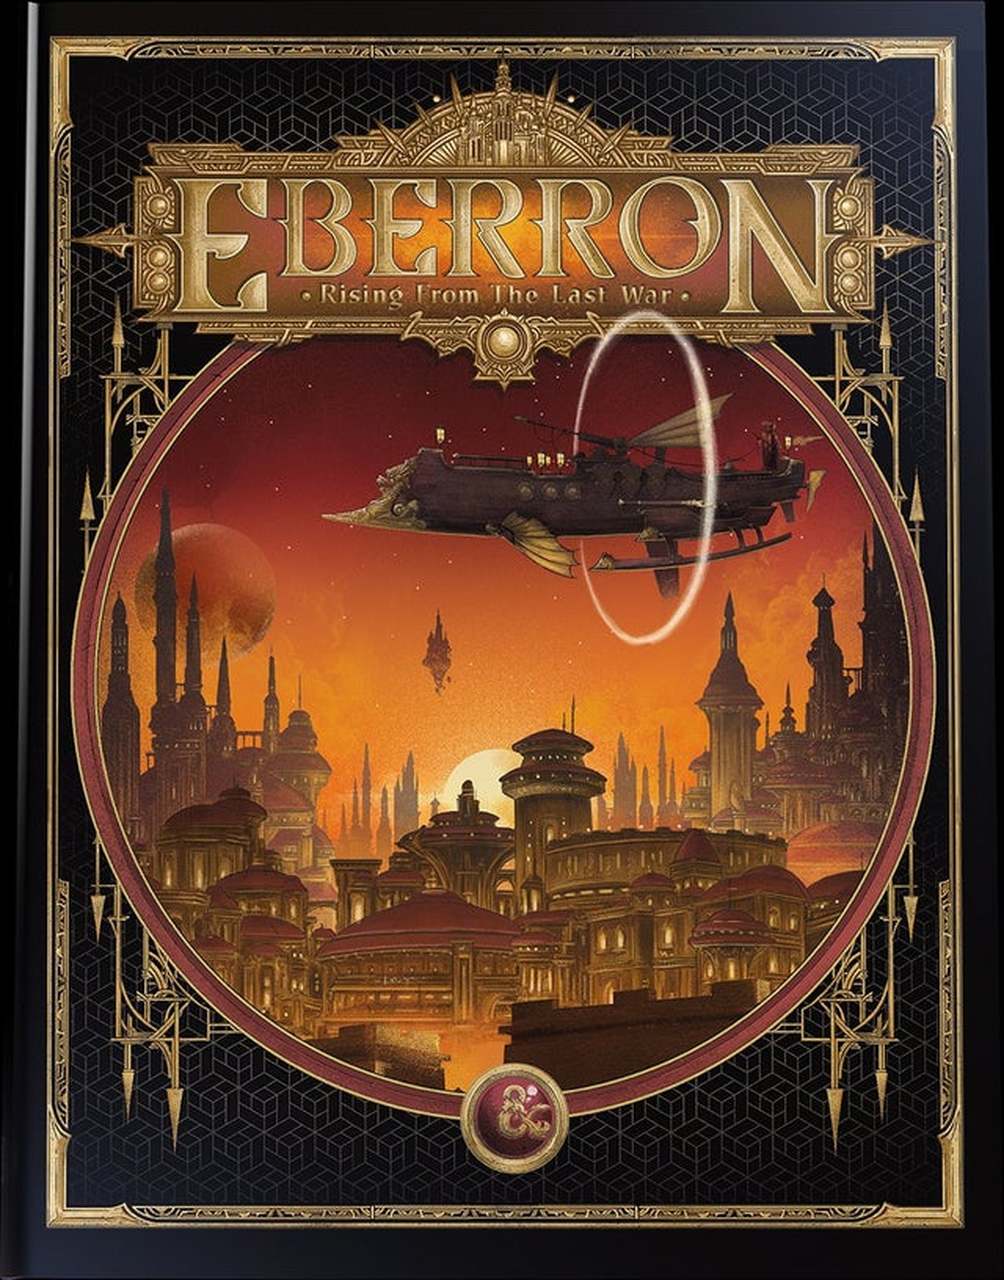 Eberron: Rising from the Last War Alternative Cover (D&d Campaign Setting and Adventure Book) | Galaxy Games LLC